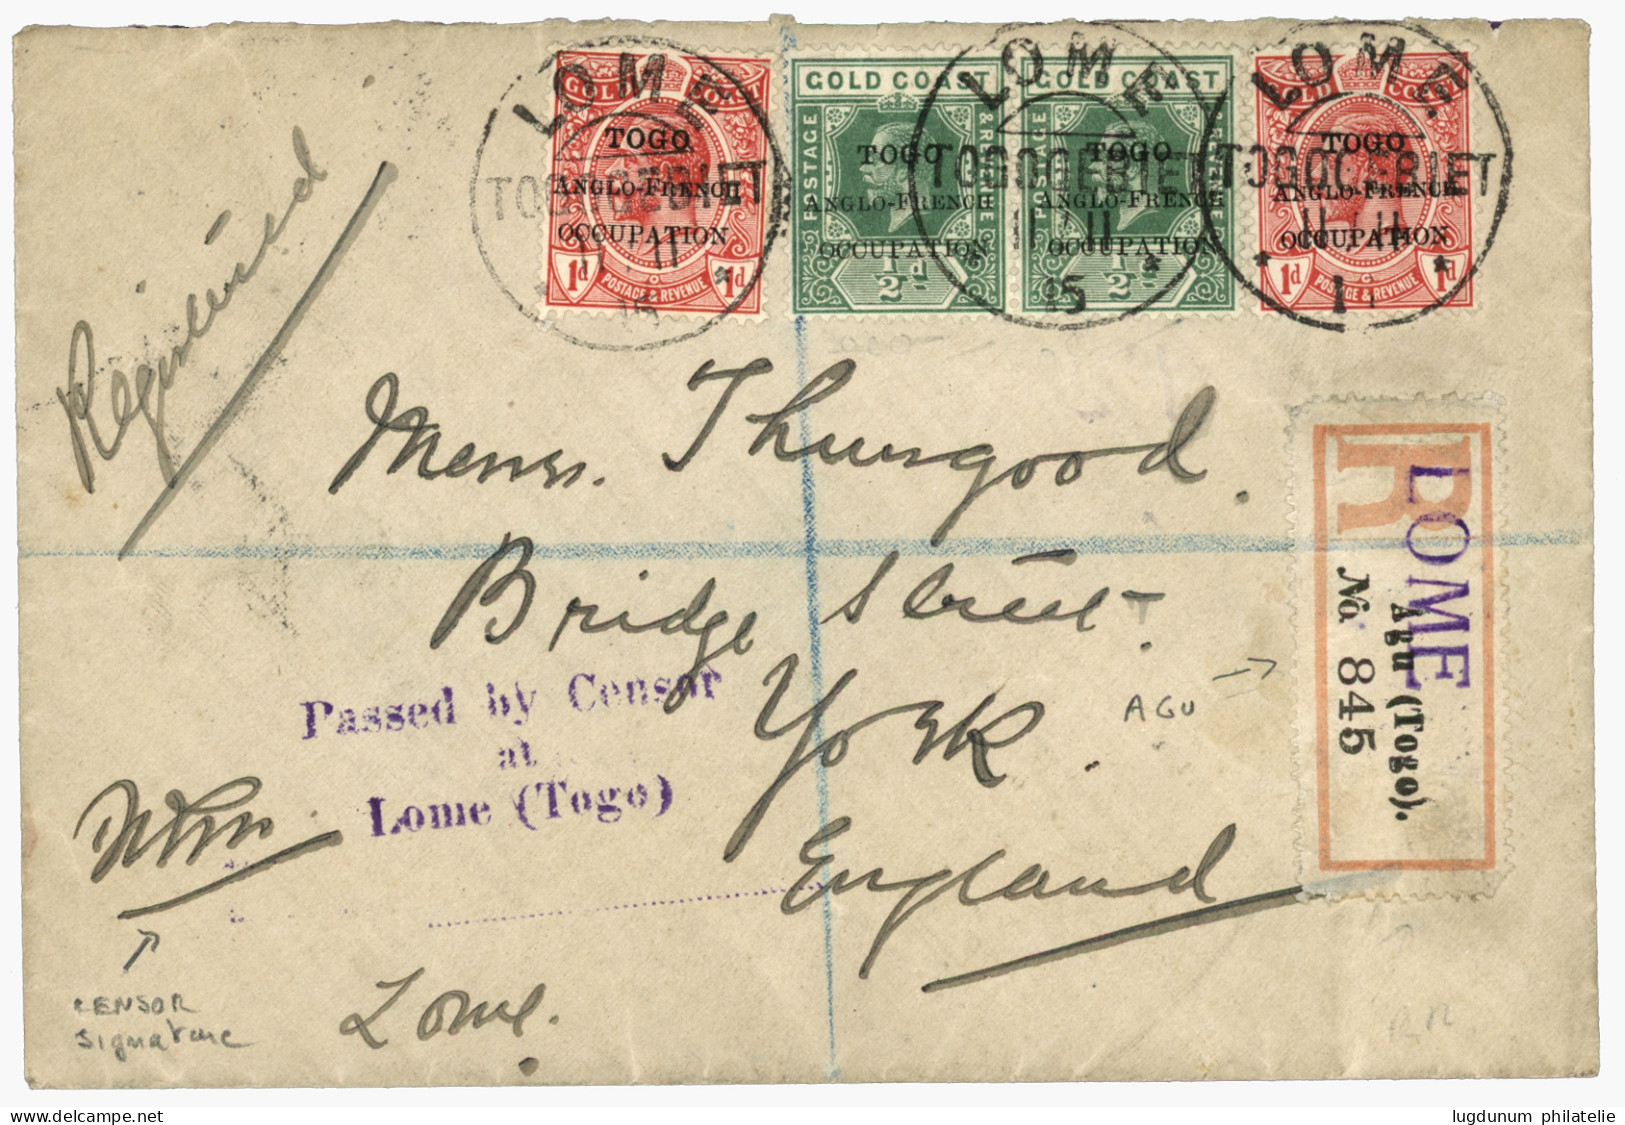 TOGO - German REGISTERED Label AGU : 1916 1/2d (x3) + 1d (x2) Canc. LOME TOGOGEBIET + PASSED BY CENSOR At LOME (TOGO) +  - Togo